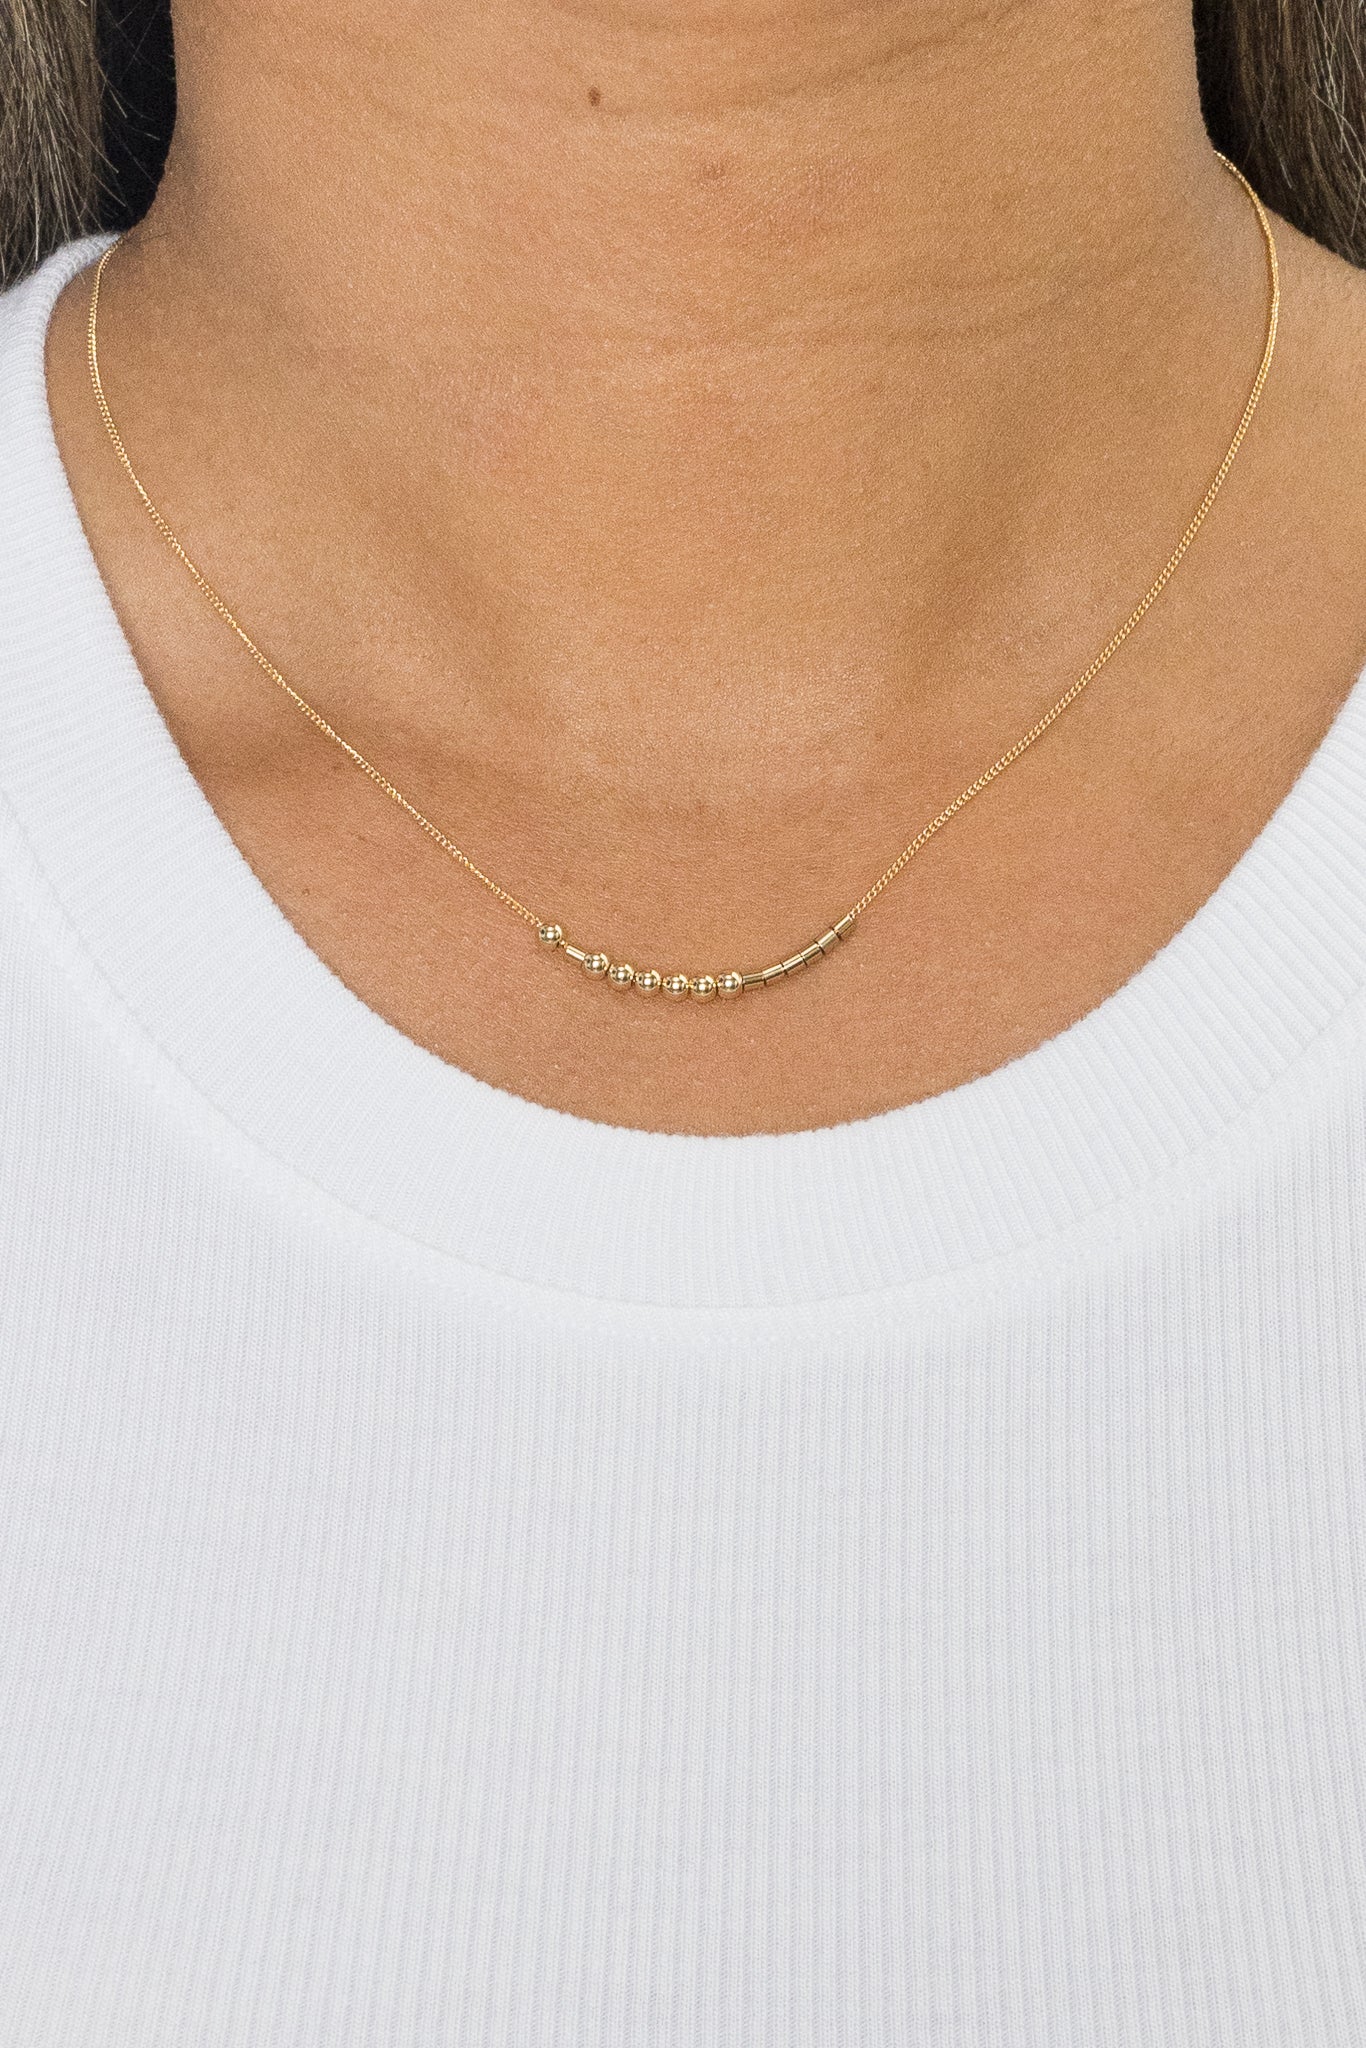 Mother Morse Code Necklace